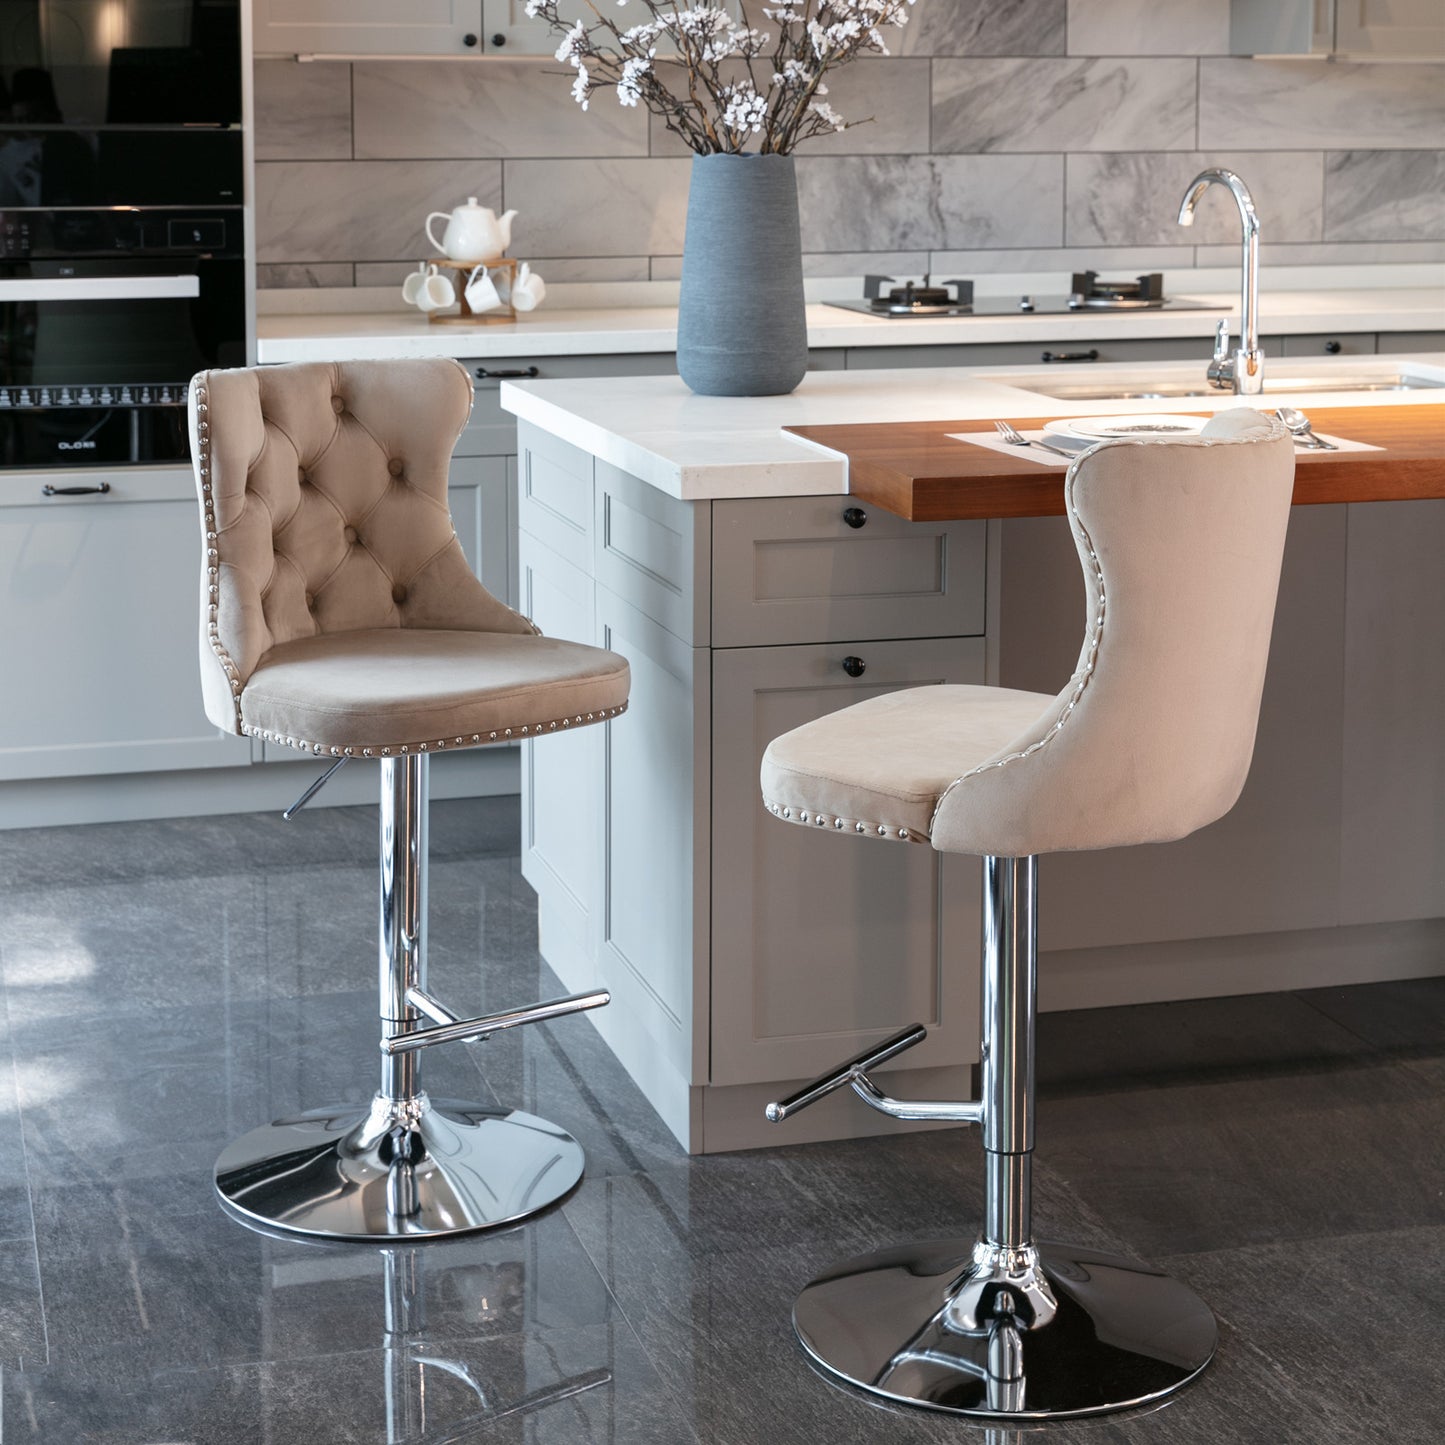 Swivel Velvet Barstools Adjusatble Seat Height from 25-33 Inch, Modern Upholstered Chrome base Bar Stools with Backs Comfortable Tufted for Home Pub and Kitchen Islandhaki, Set of 2)